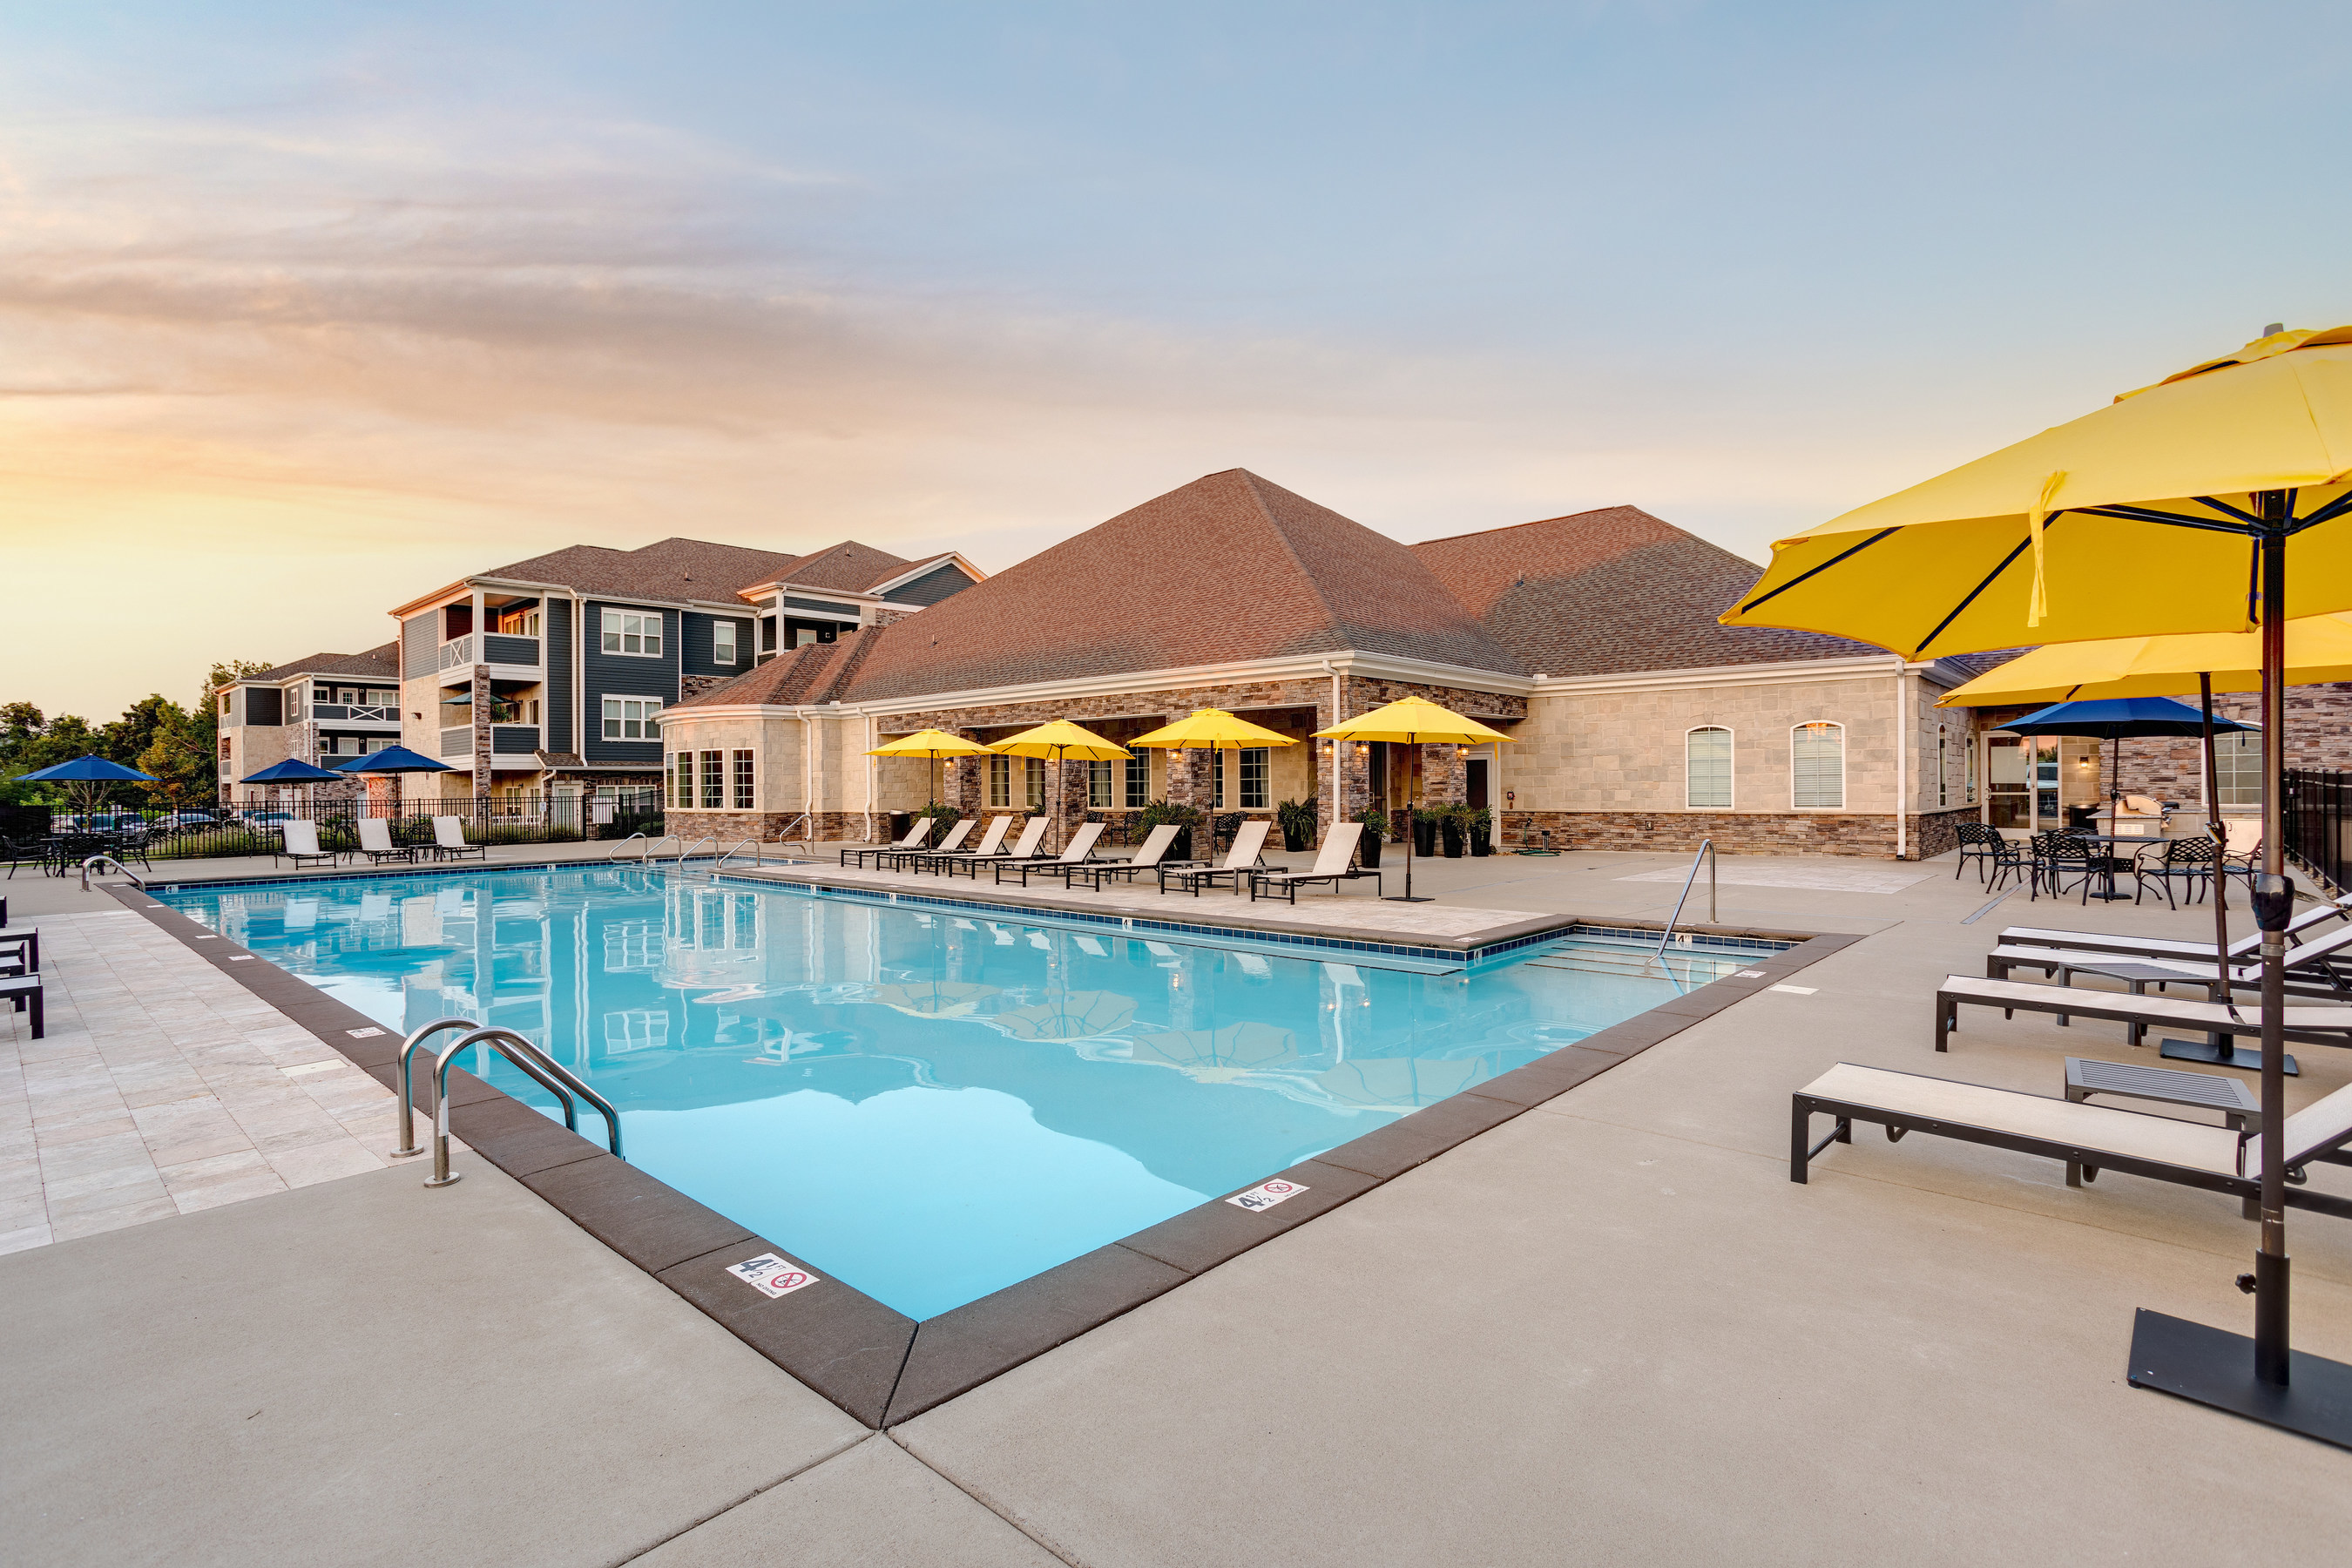 West Shore Expands to New Market With Acquisition of 312-Unit The Pointe at Five Oaks Apartment Community in Nashville Submarket